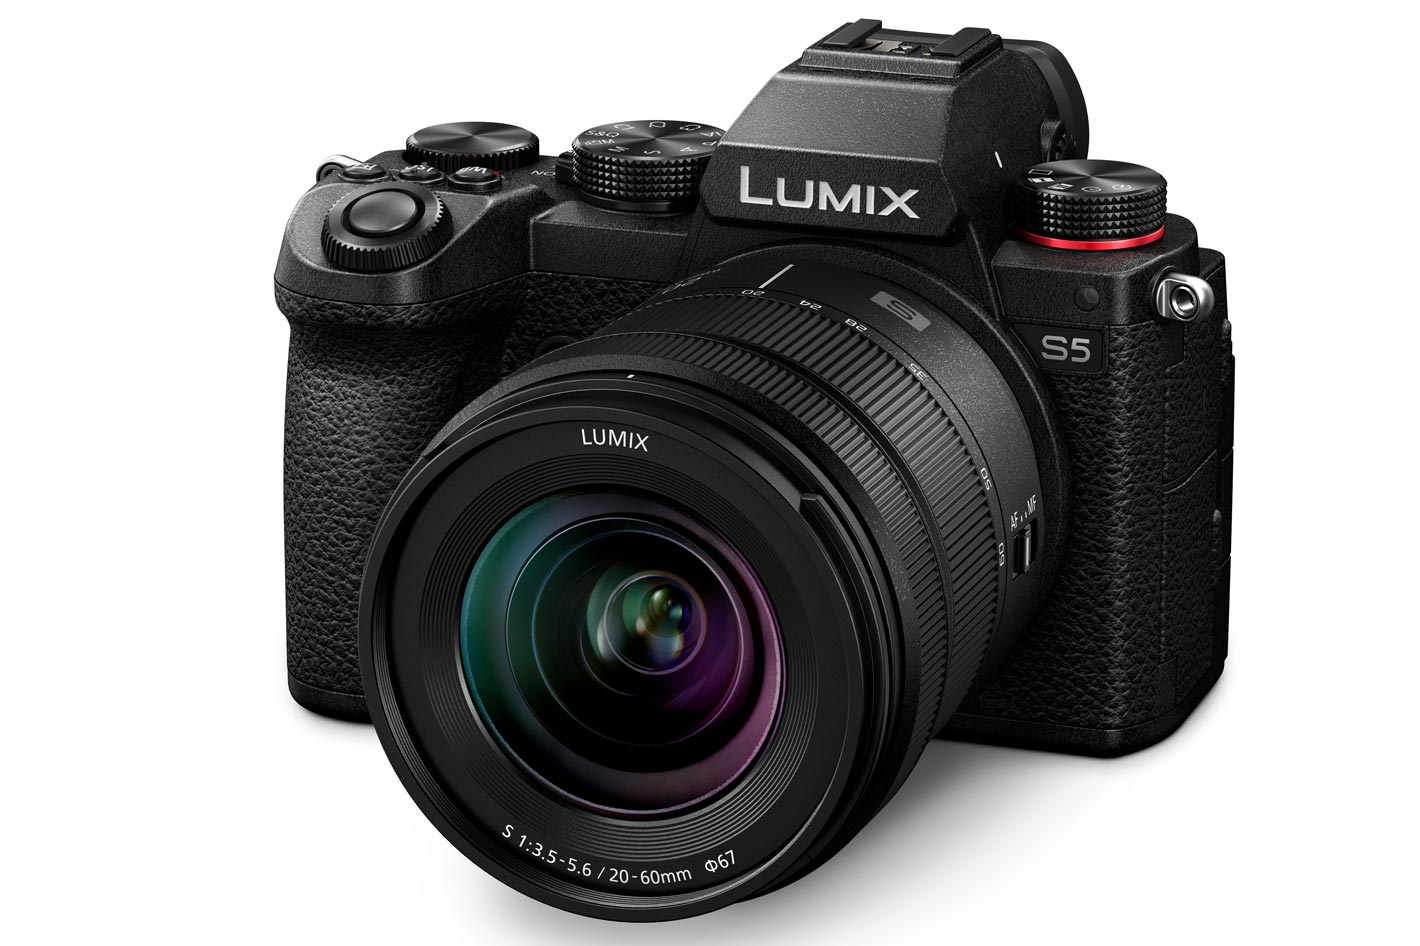 LUMIX S5: a camera for videographers and photographers